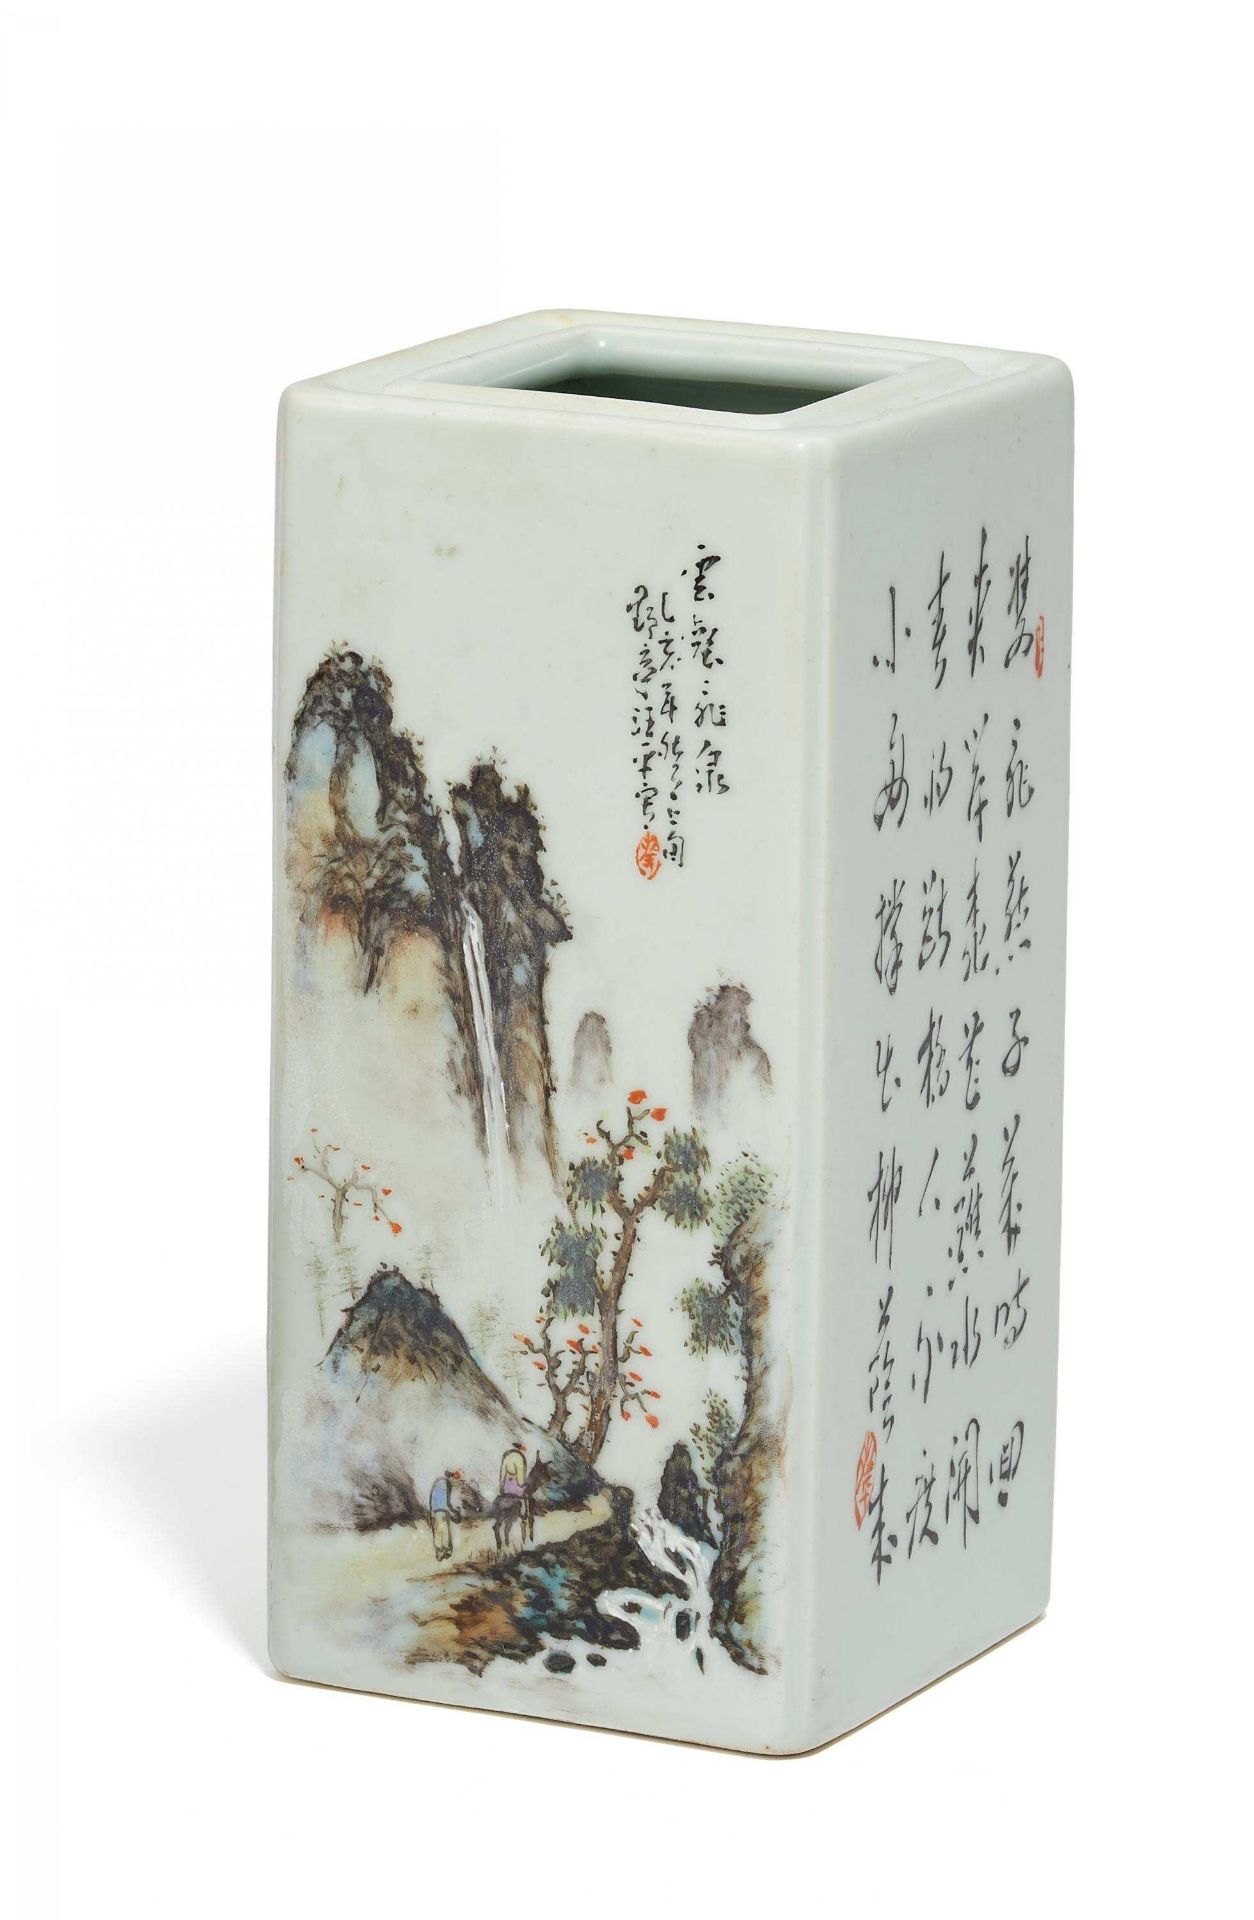 BRUSH POT. LANDSCAPES AND POEMS. China. Cyclical dated 1935. Wang Yeting (1884-1942). Porcelain with